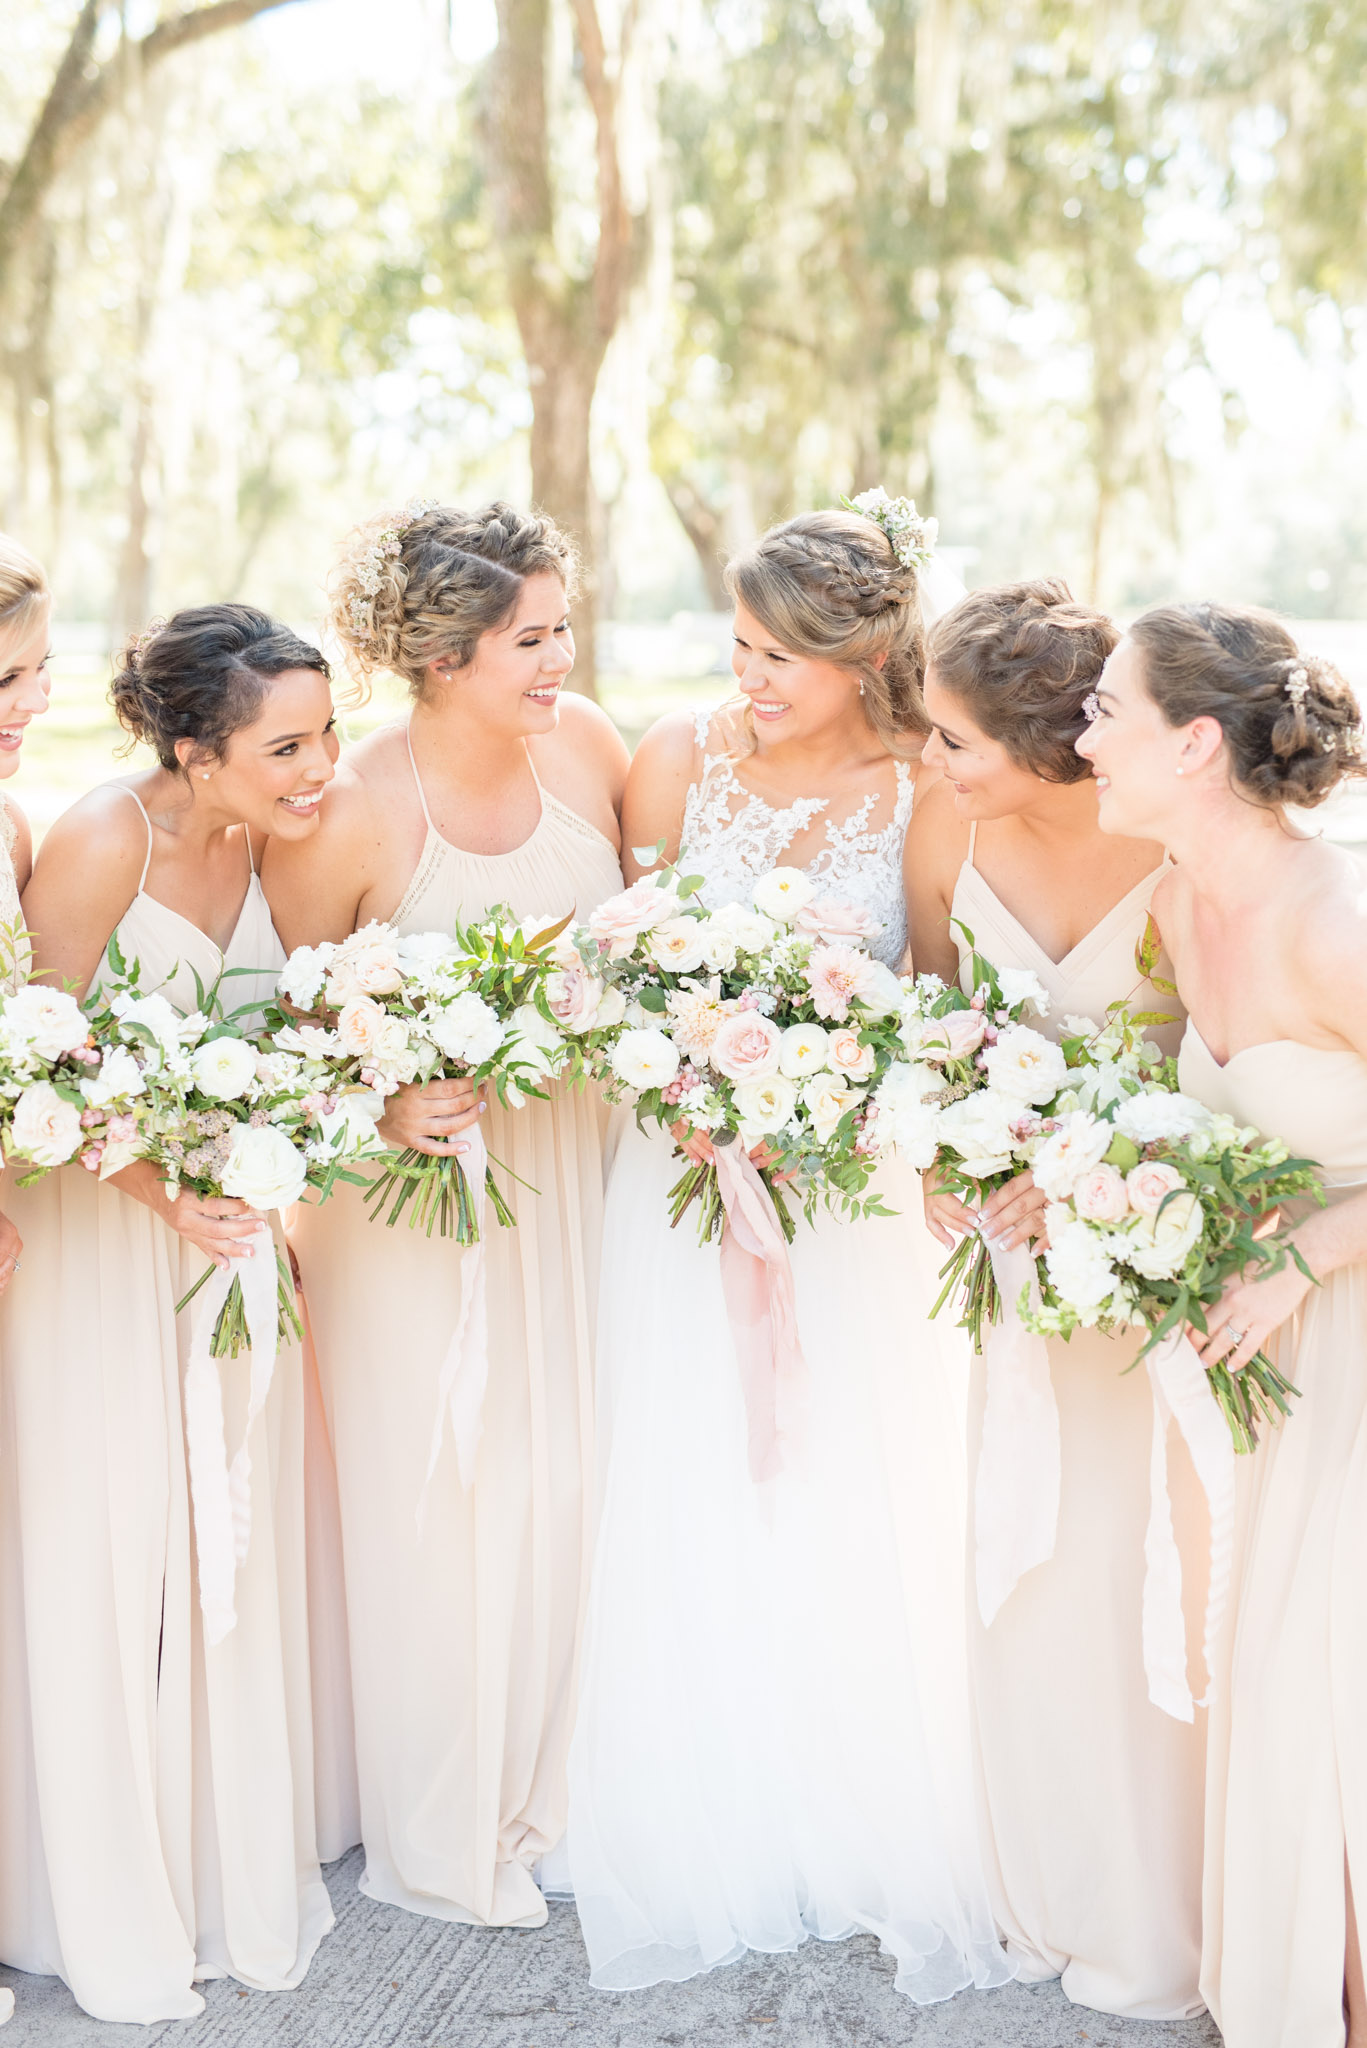 Bridal party giggles together.